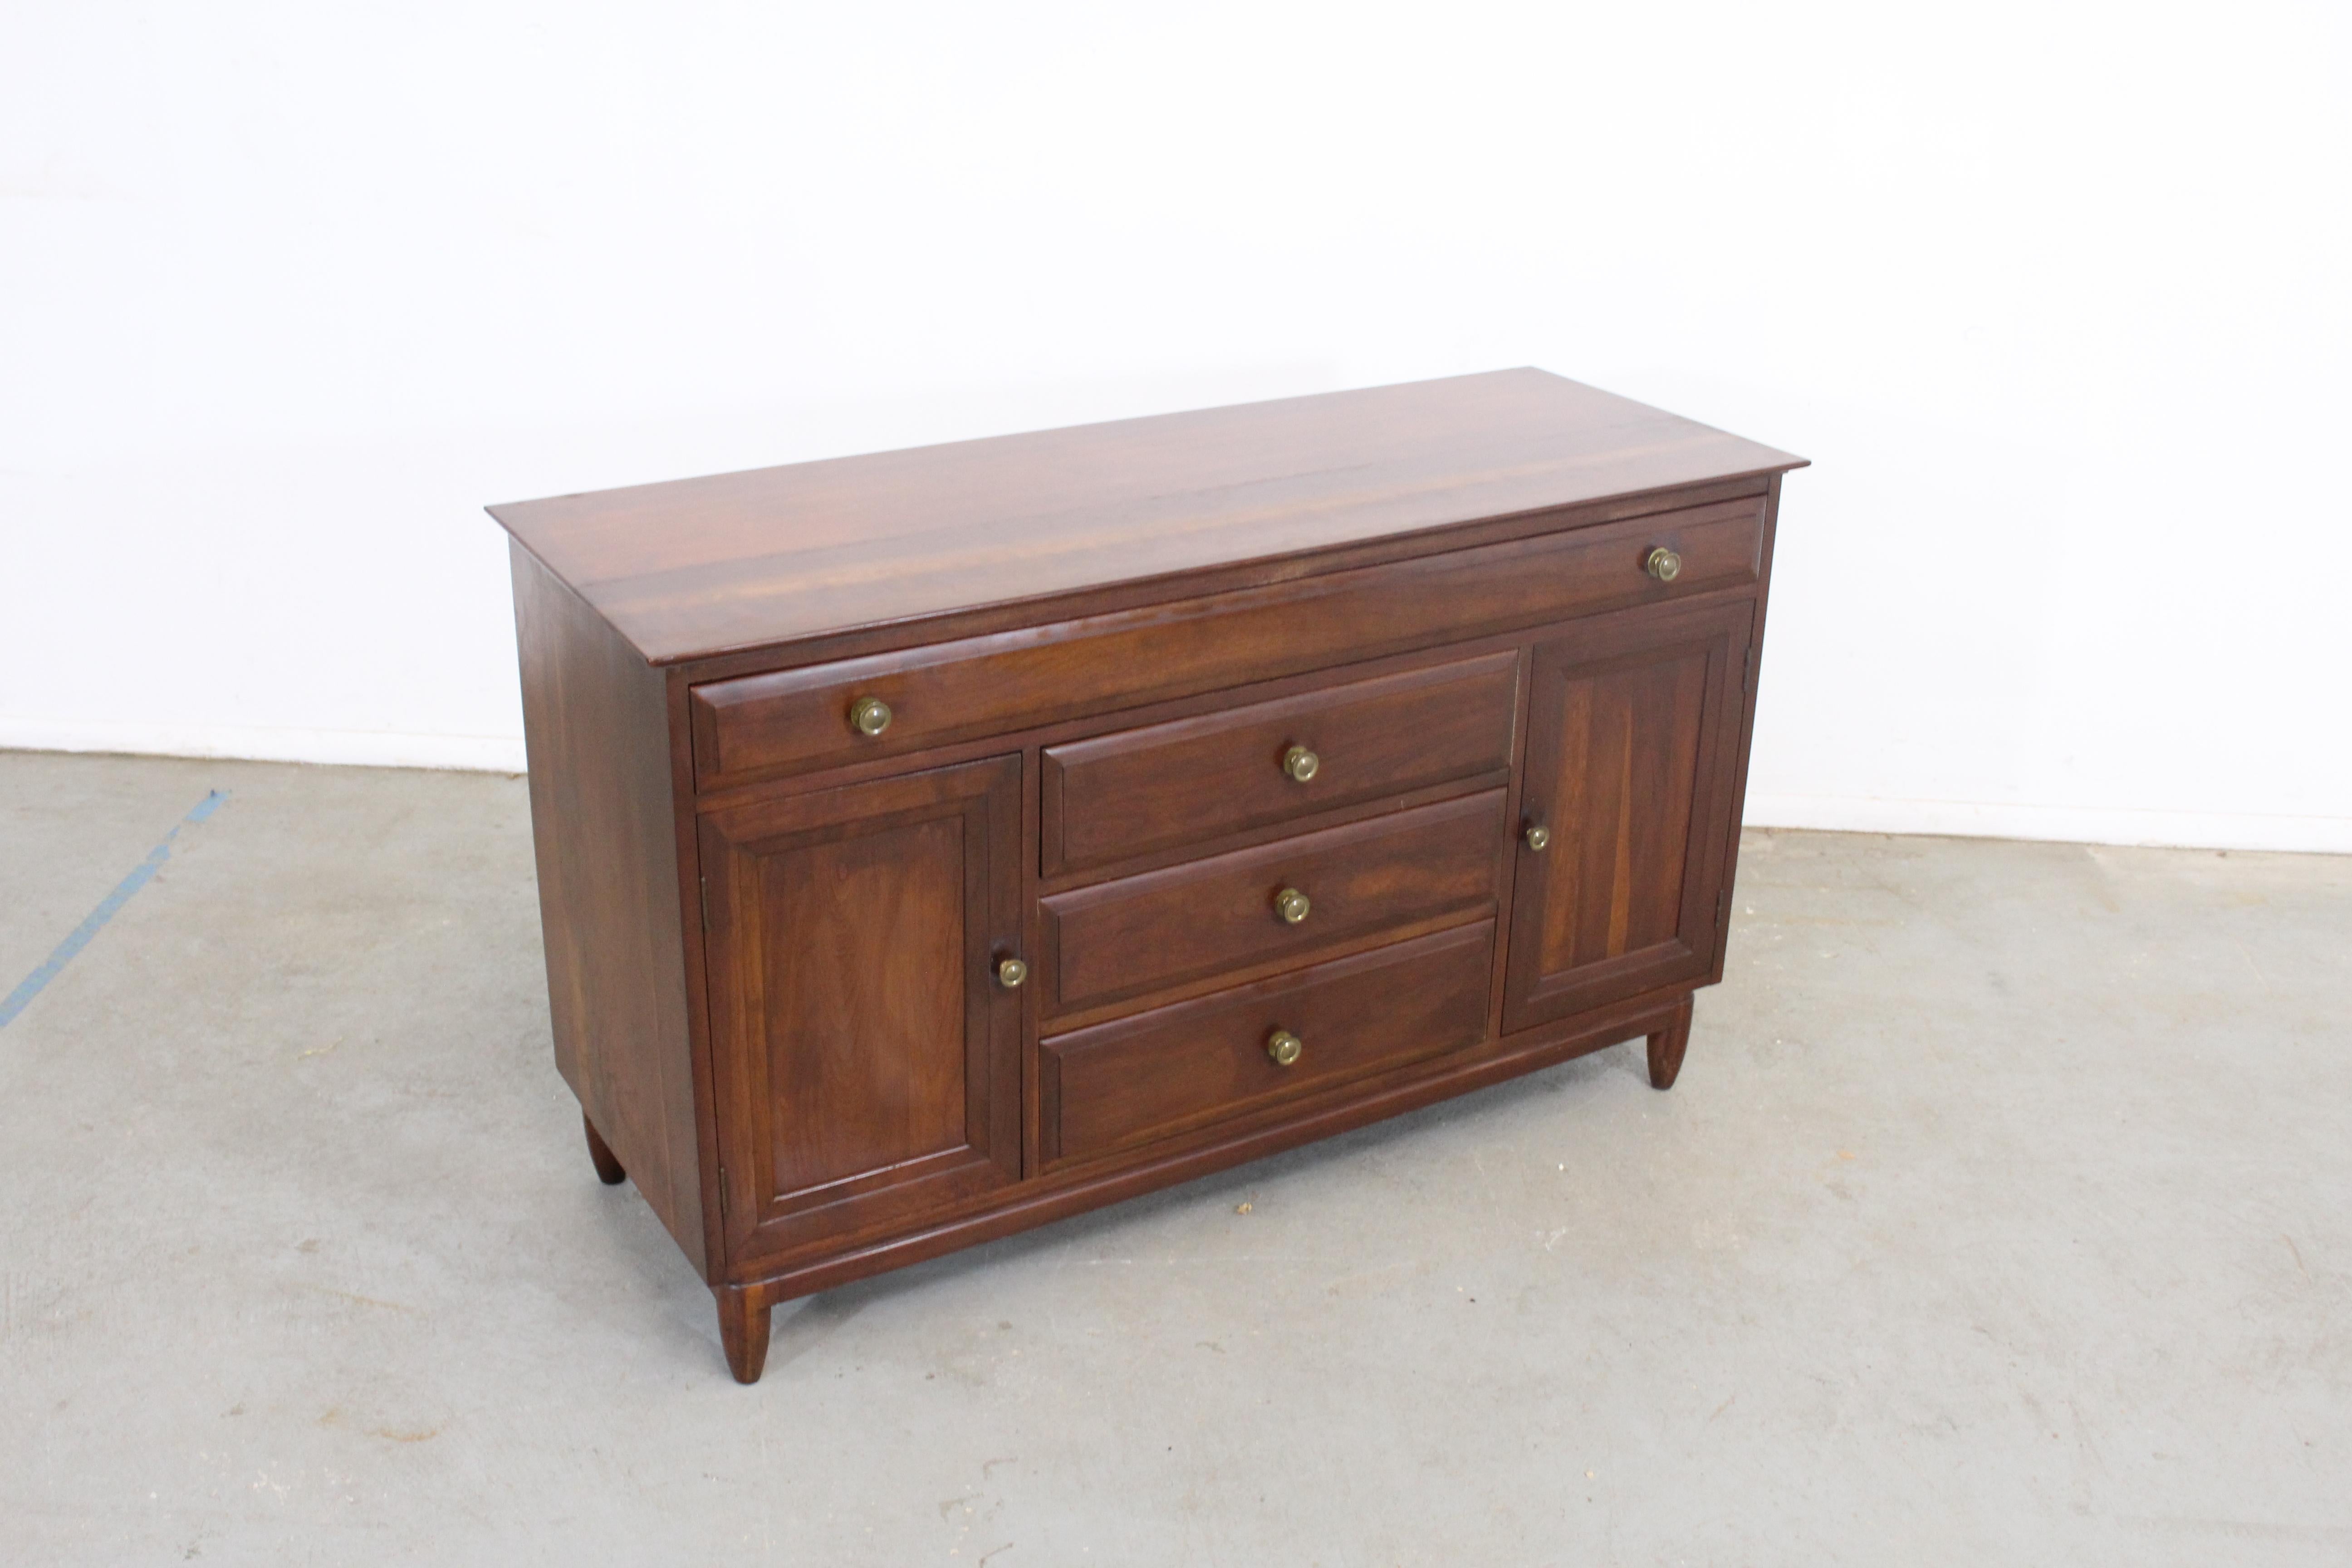 Mid-Century Modern Willett credenza/sideboard

Offered is a Mid-Century Modern Willett credenza/sideboard. Has 4 dovetailed drawers - one atop with rectangular framing on fronts and brass pulls, as well as three bottom drawers. It is in very good